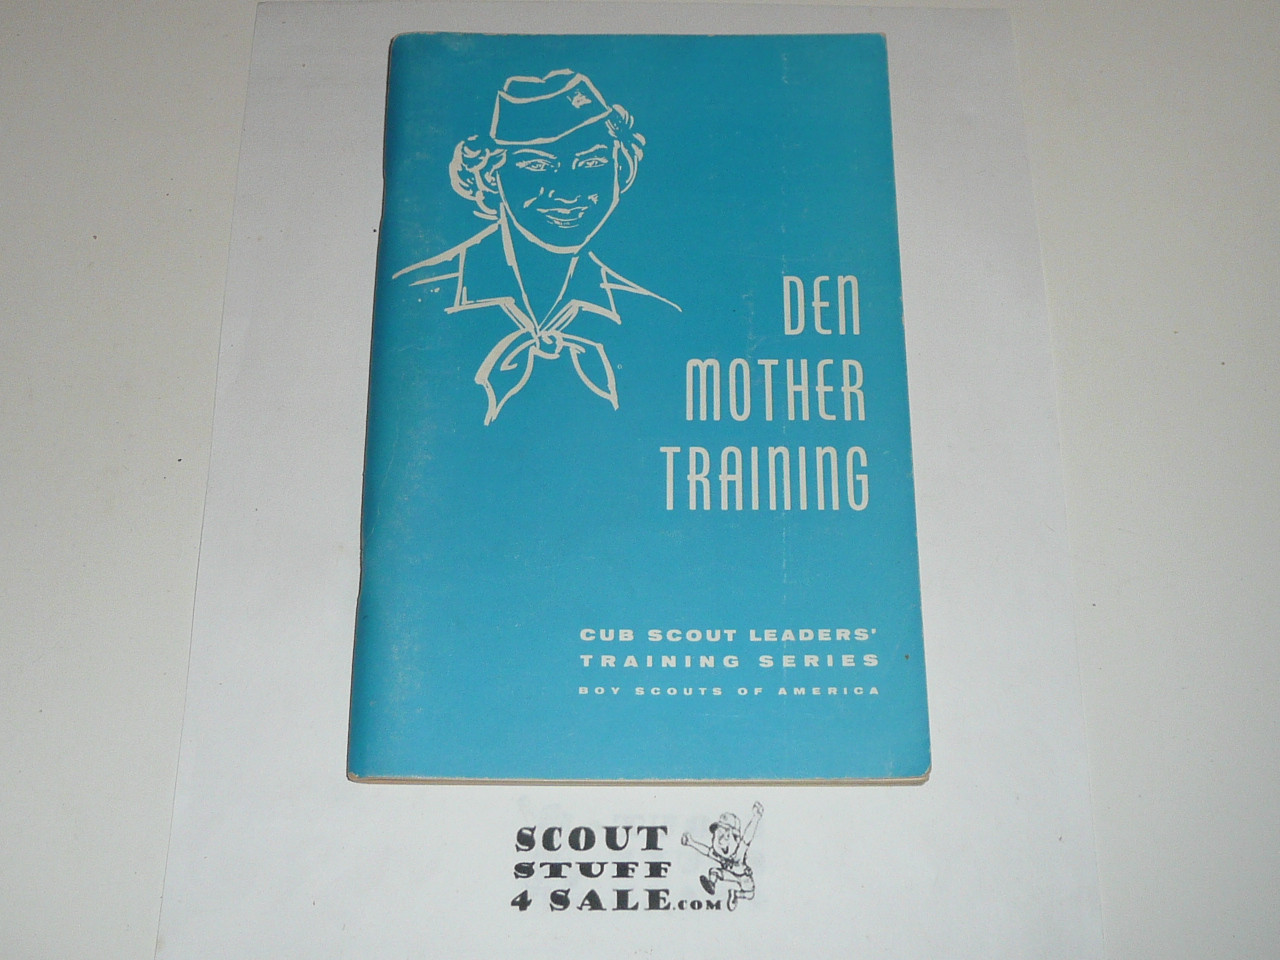 Cub Scout Leaders' Training Series, Den Mother Training, 1950's printing